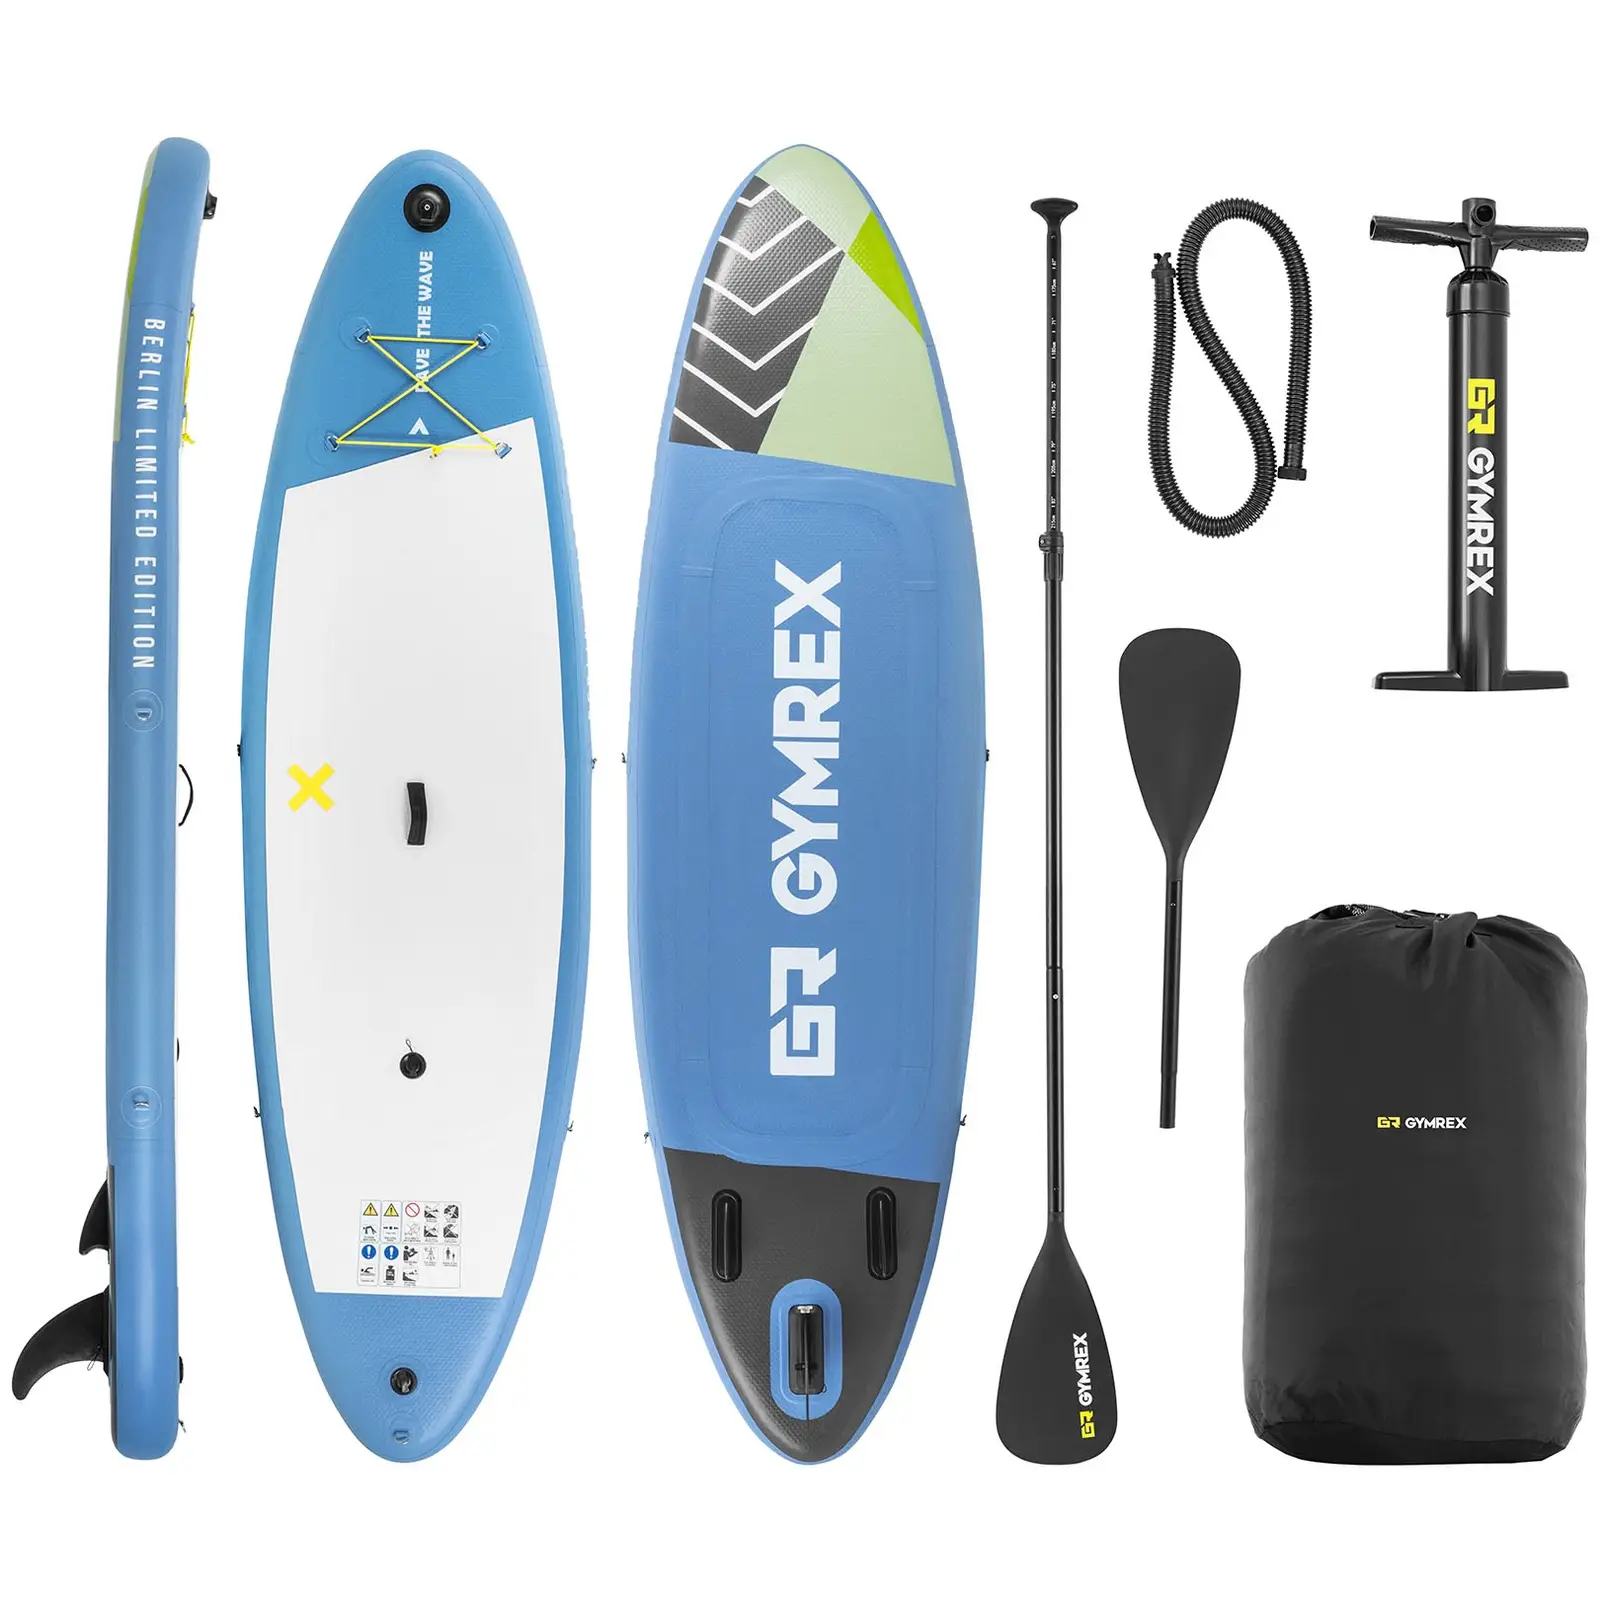 Inflatable paddle board - inflatable - 105 kg - light blue- double chamber - 302 x 81 x 38 cm